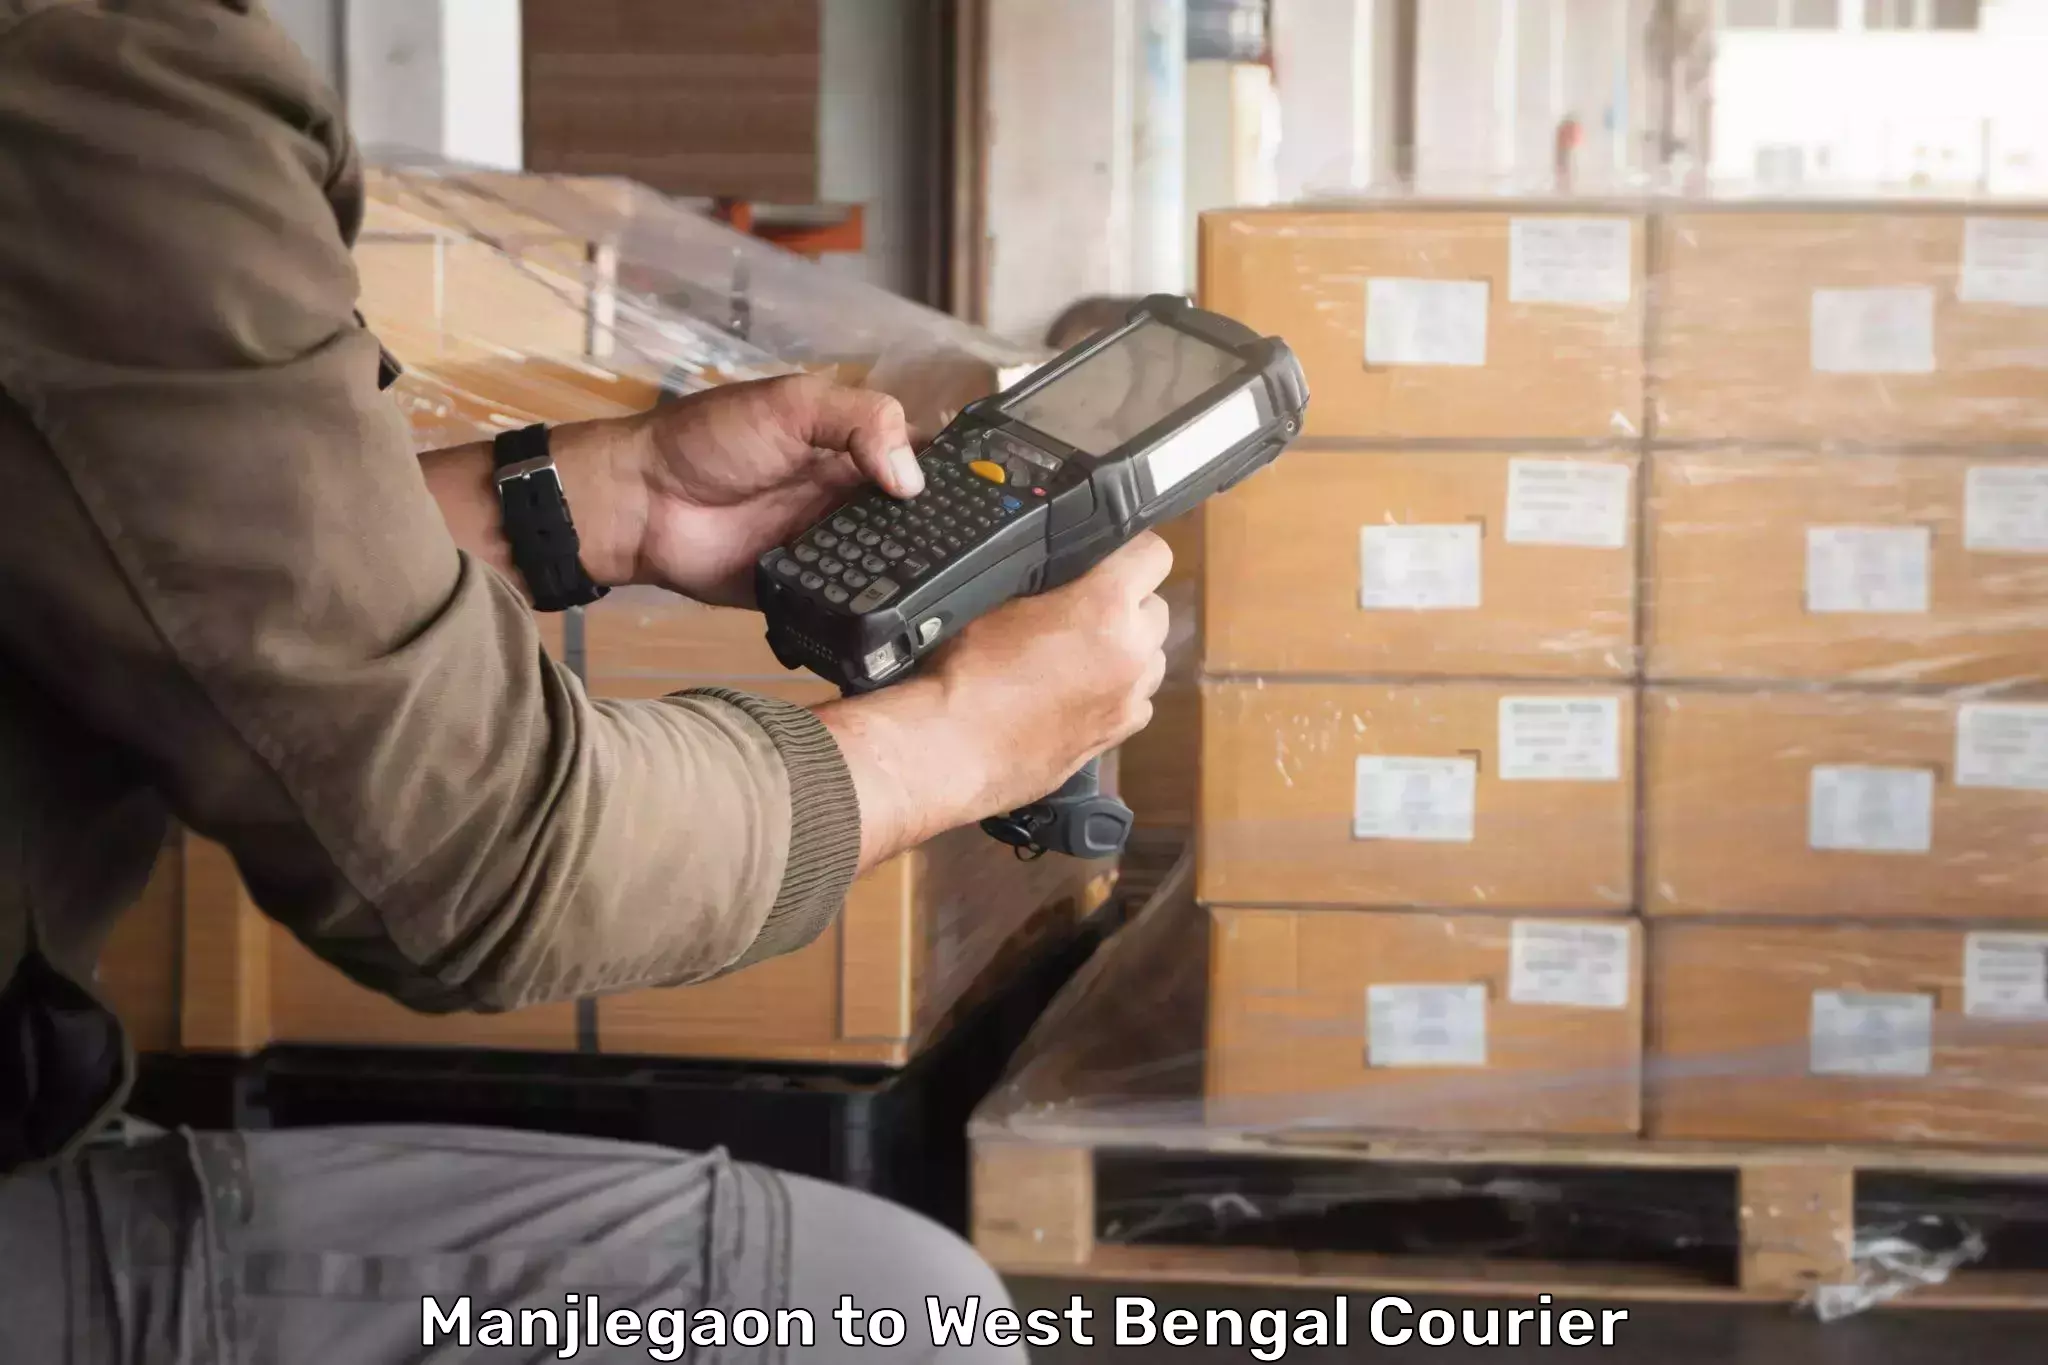 Custom courier packaging Manjlegaon to West Bengal